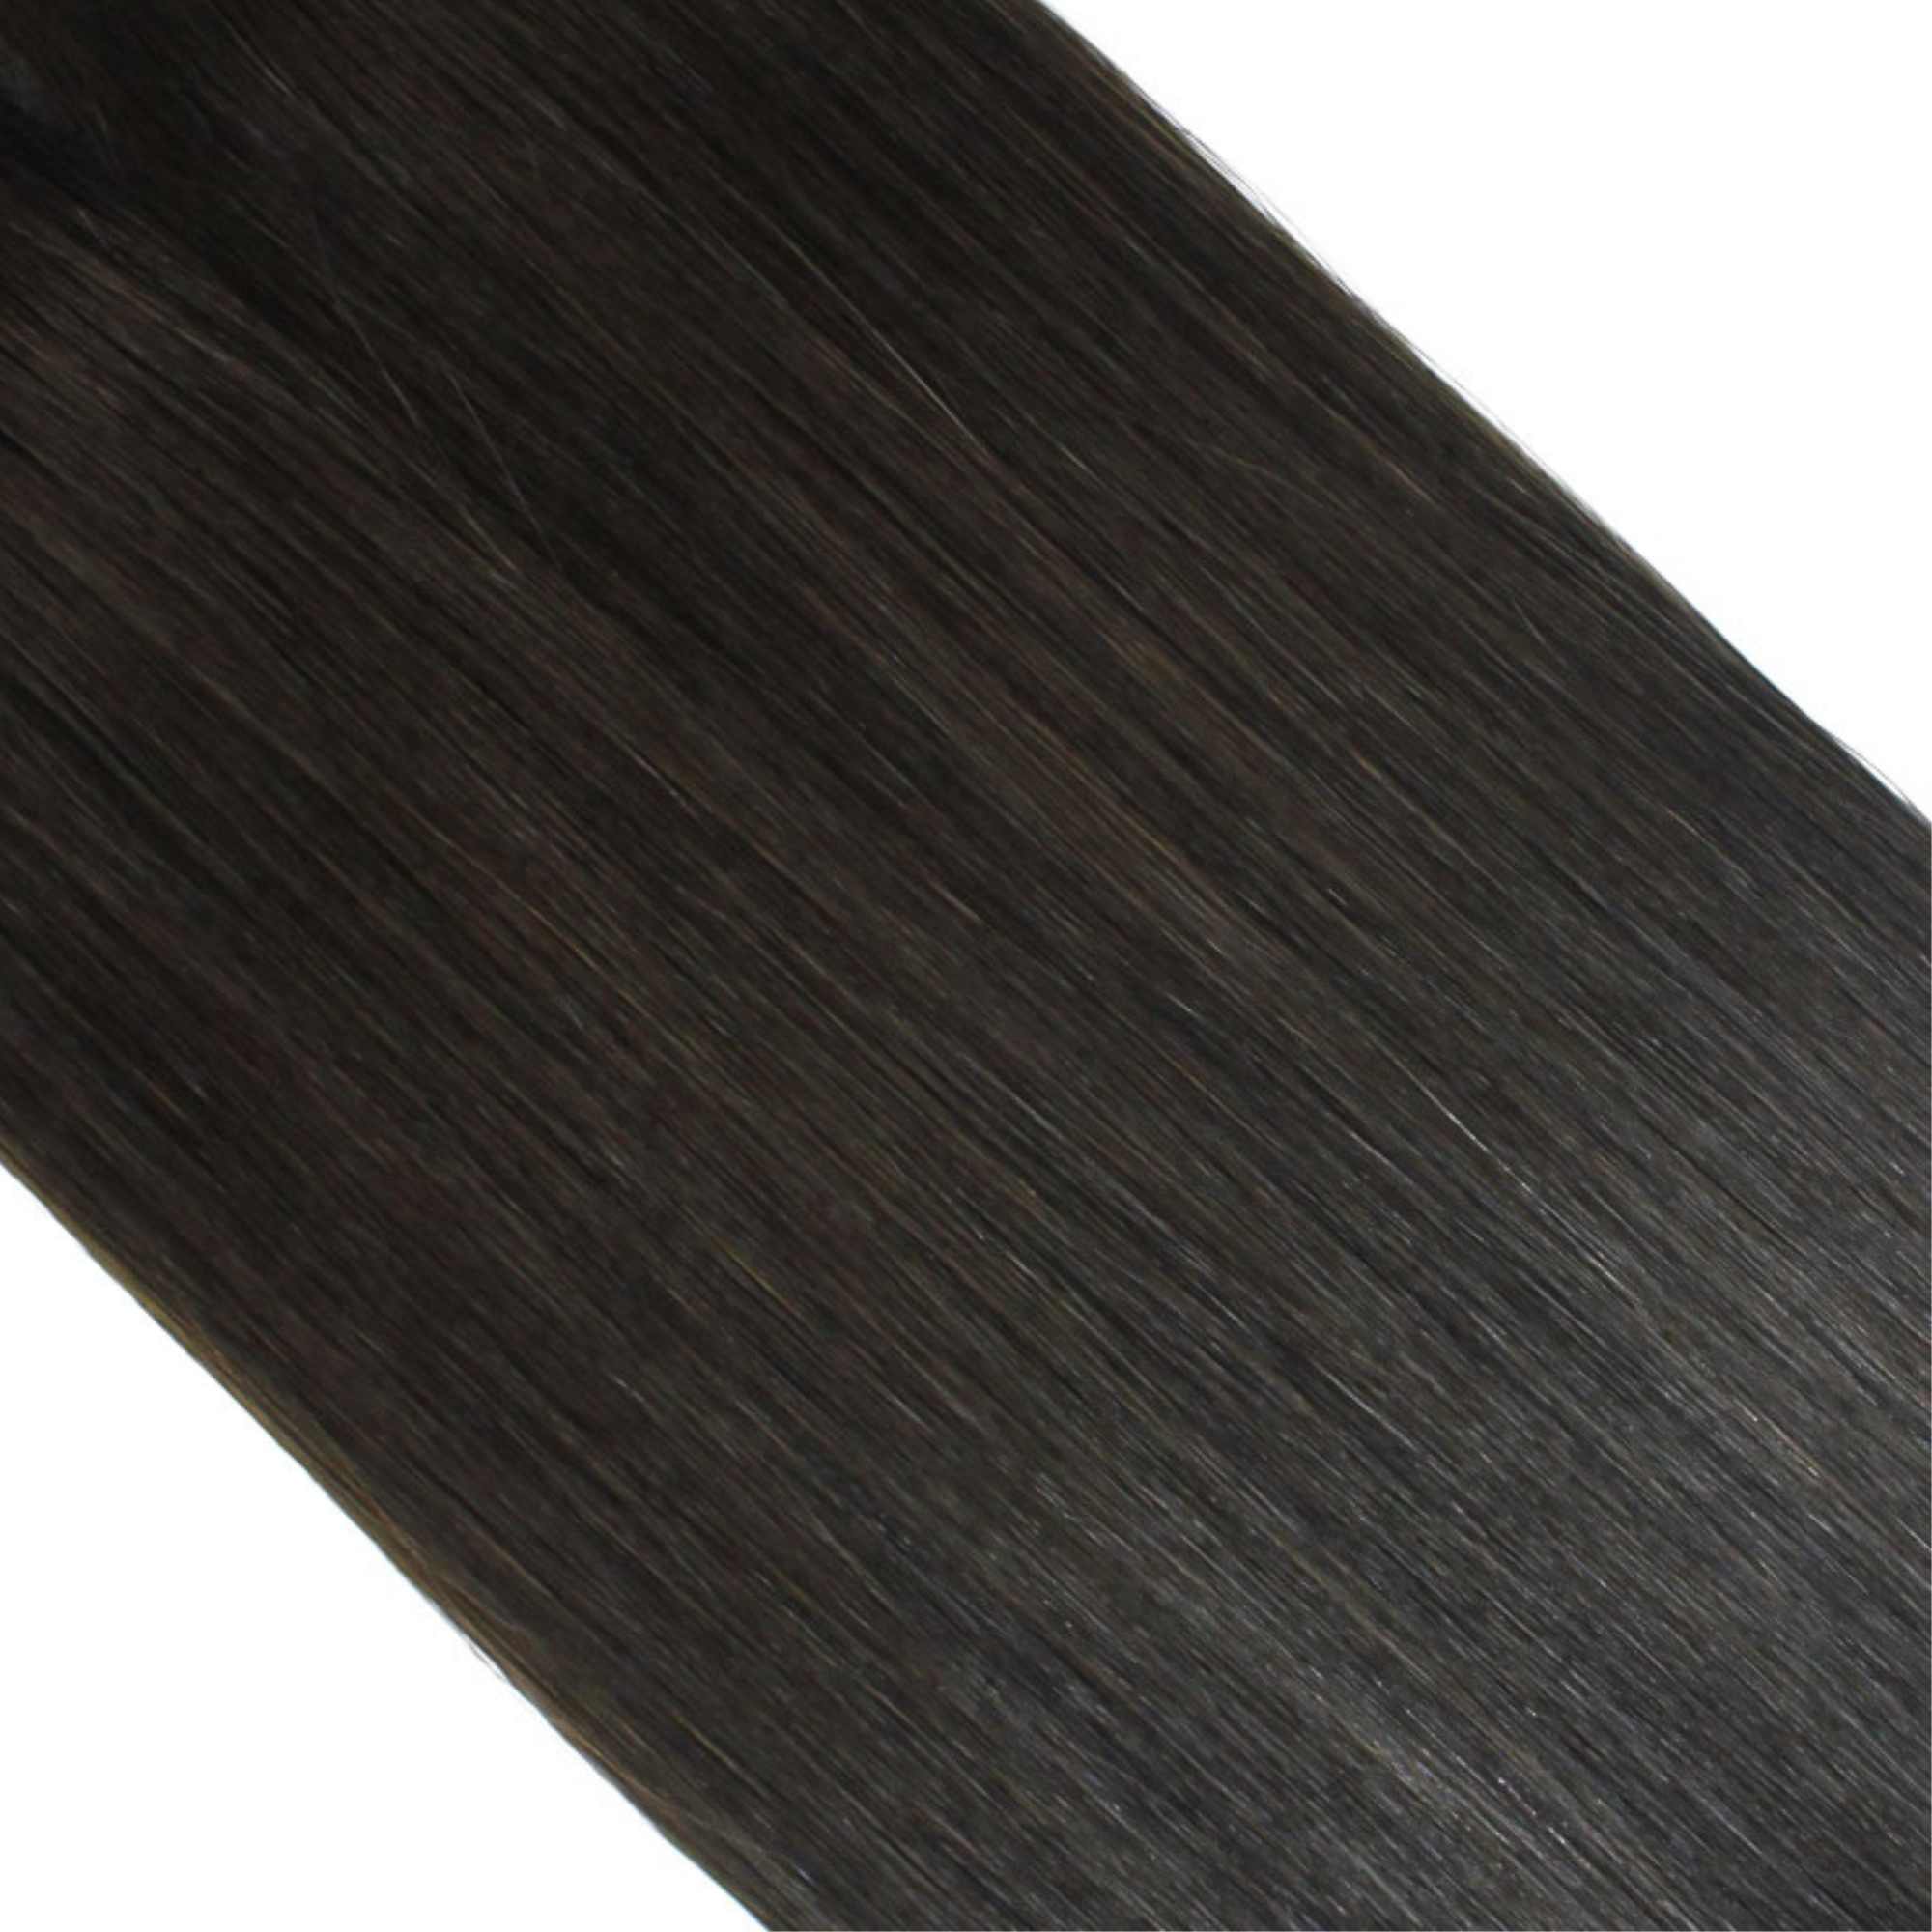 "hair rehab london 14" tape hair extensions shade swatch titled show stopper"